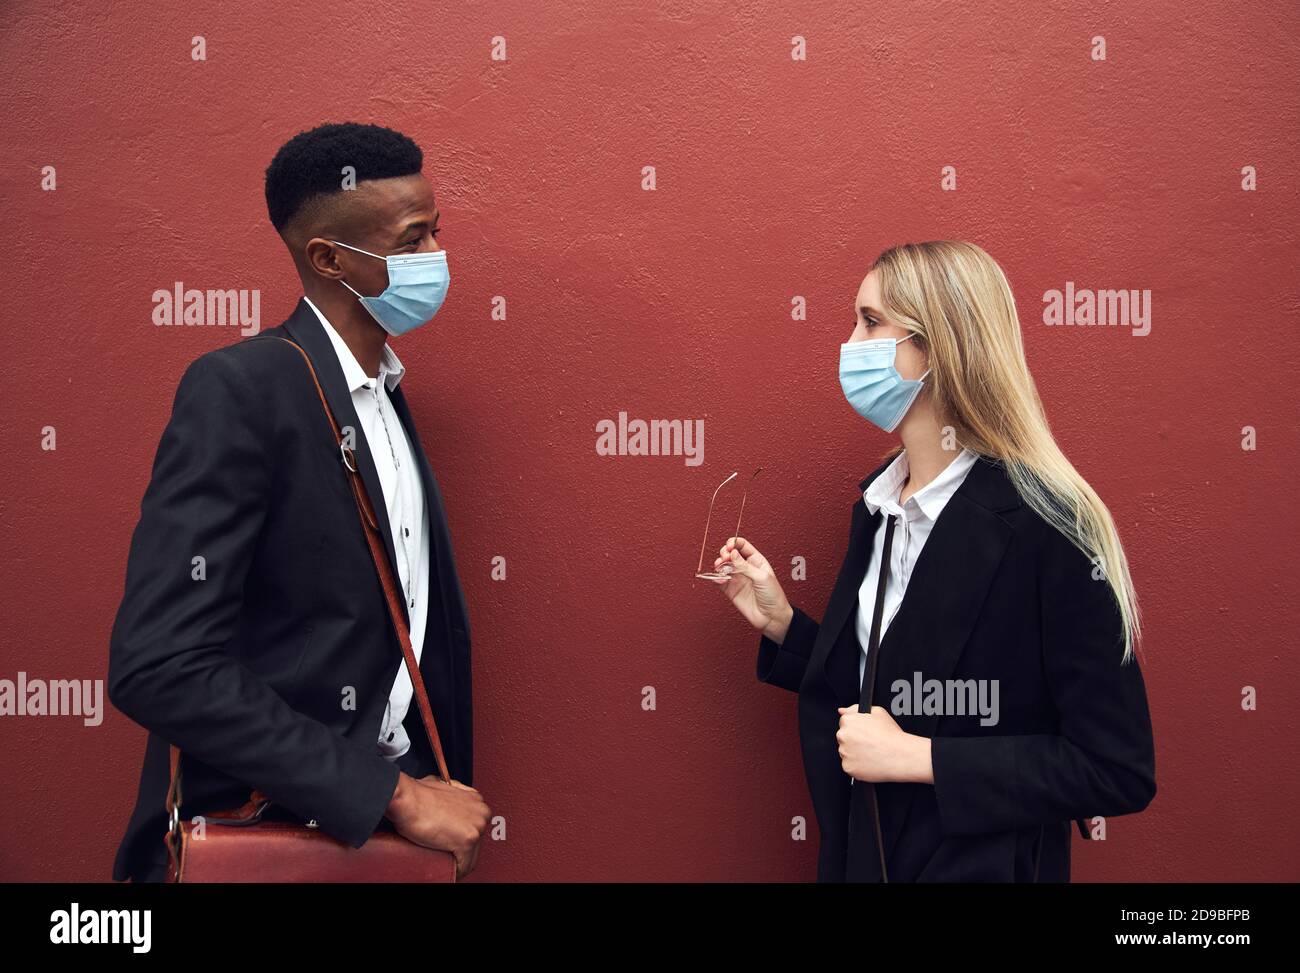 Businessman And Businesswoman Wearing Masks Standing By Wall Outside Office During Health Pandemic Stock Photo